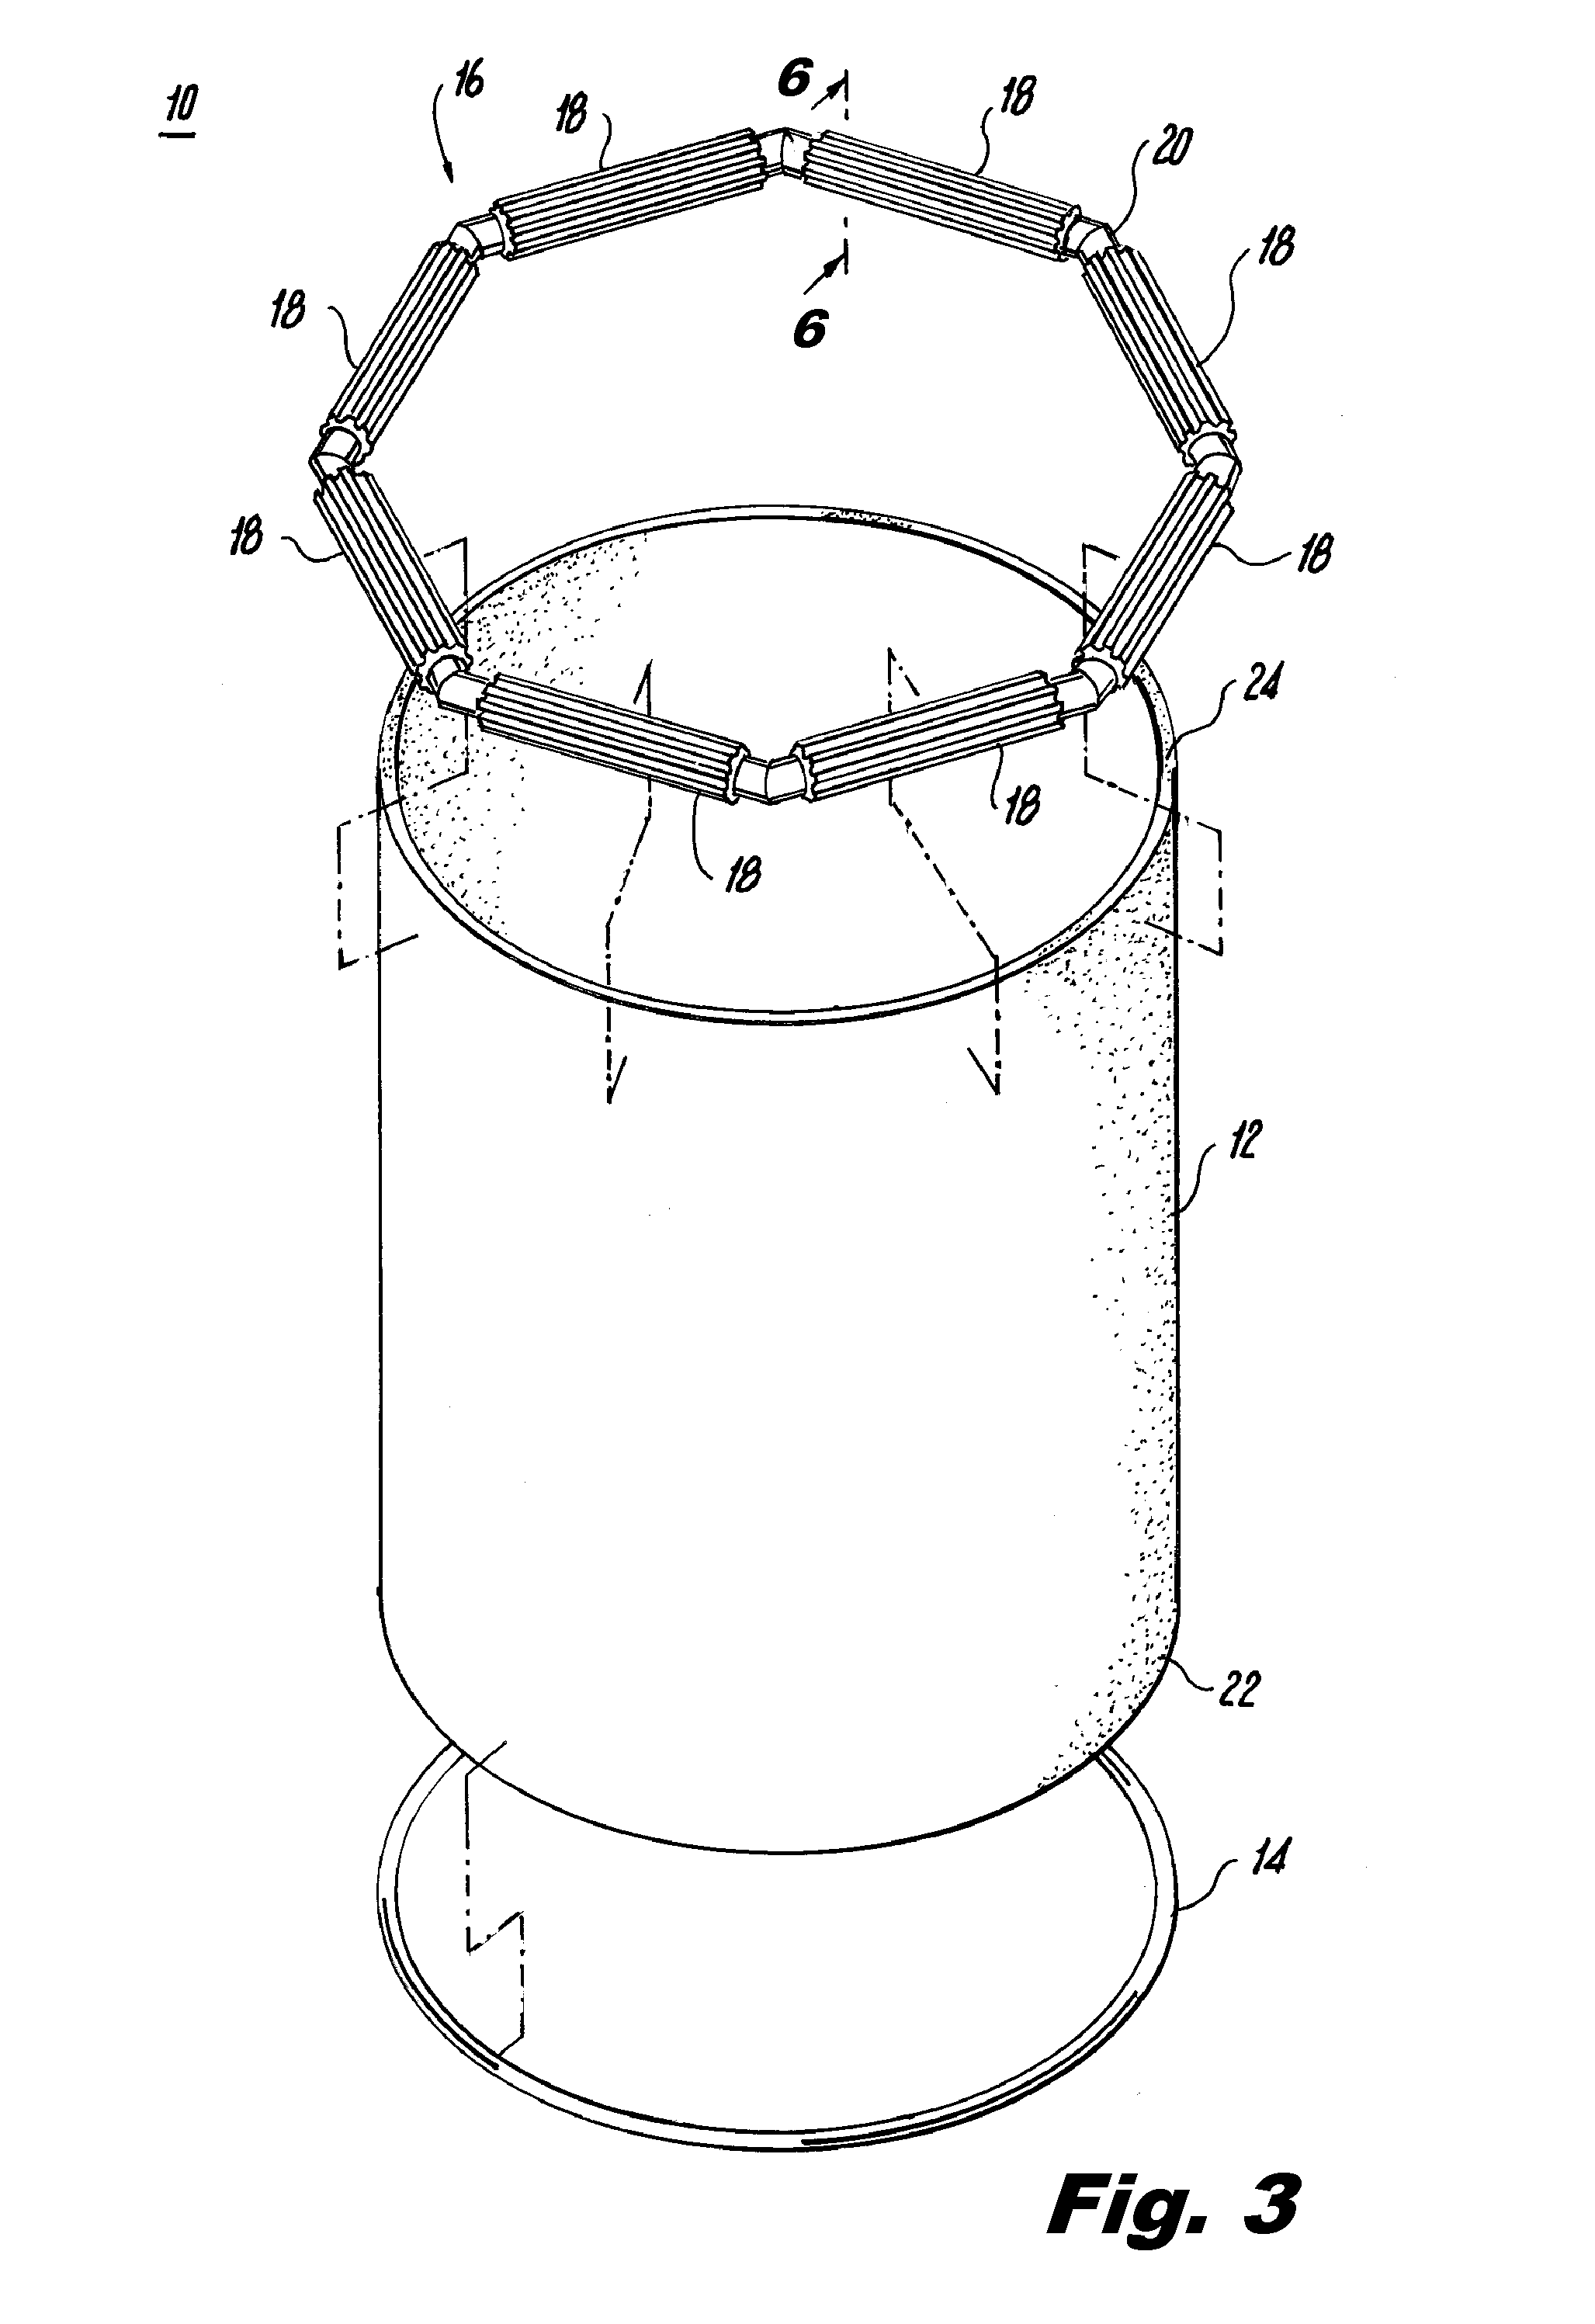 Surgical retractor including polygonal rolling structure